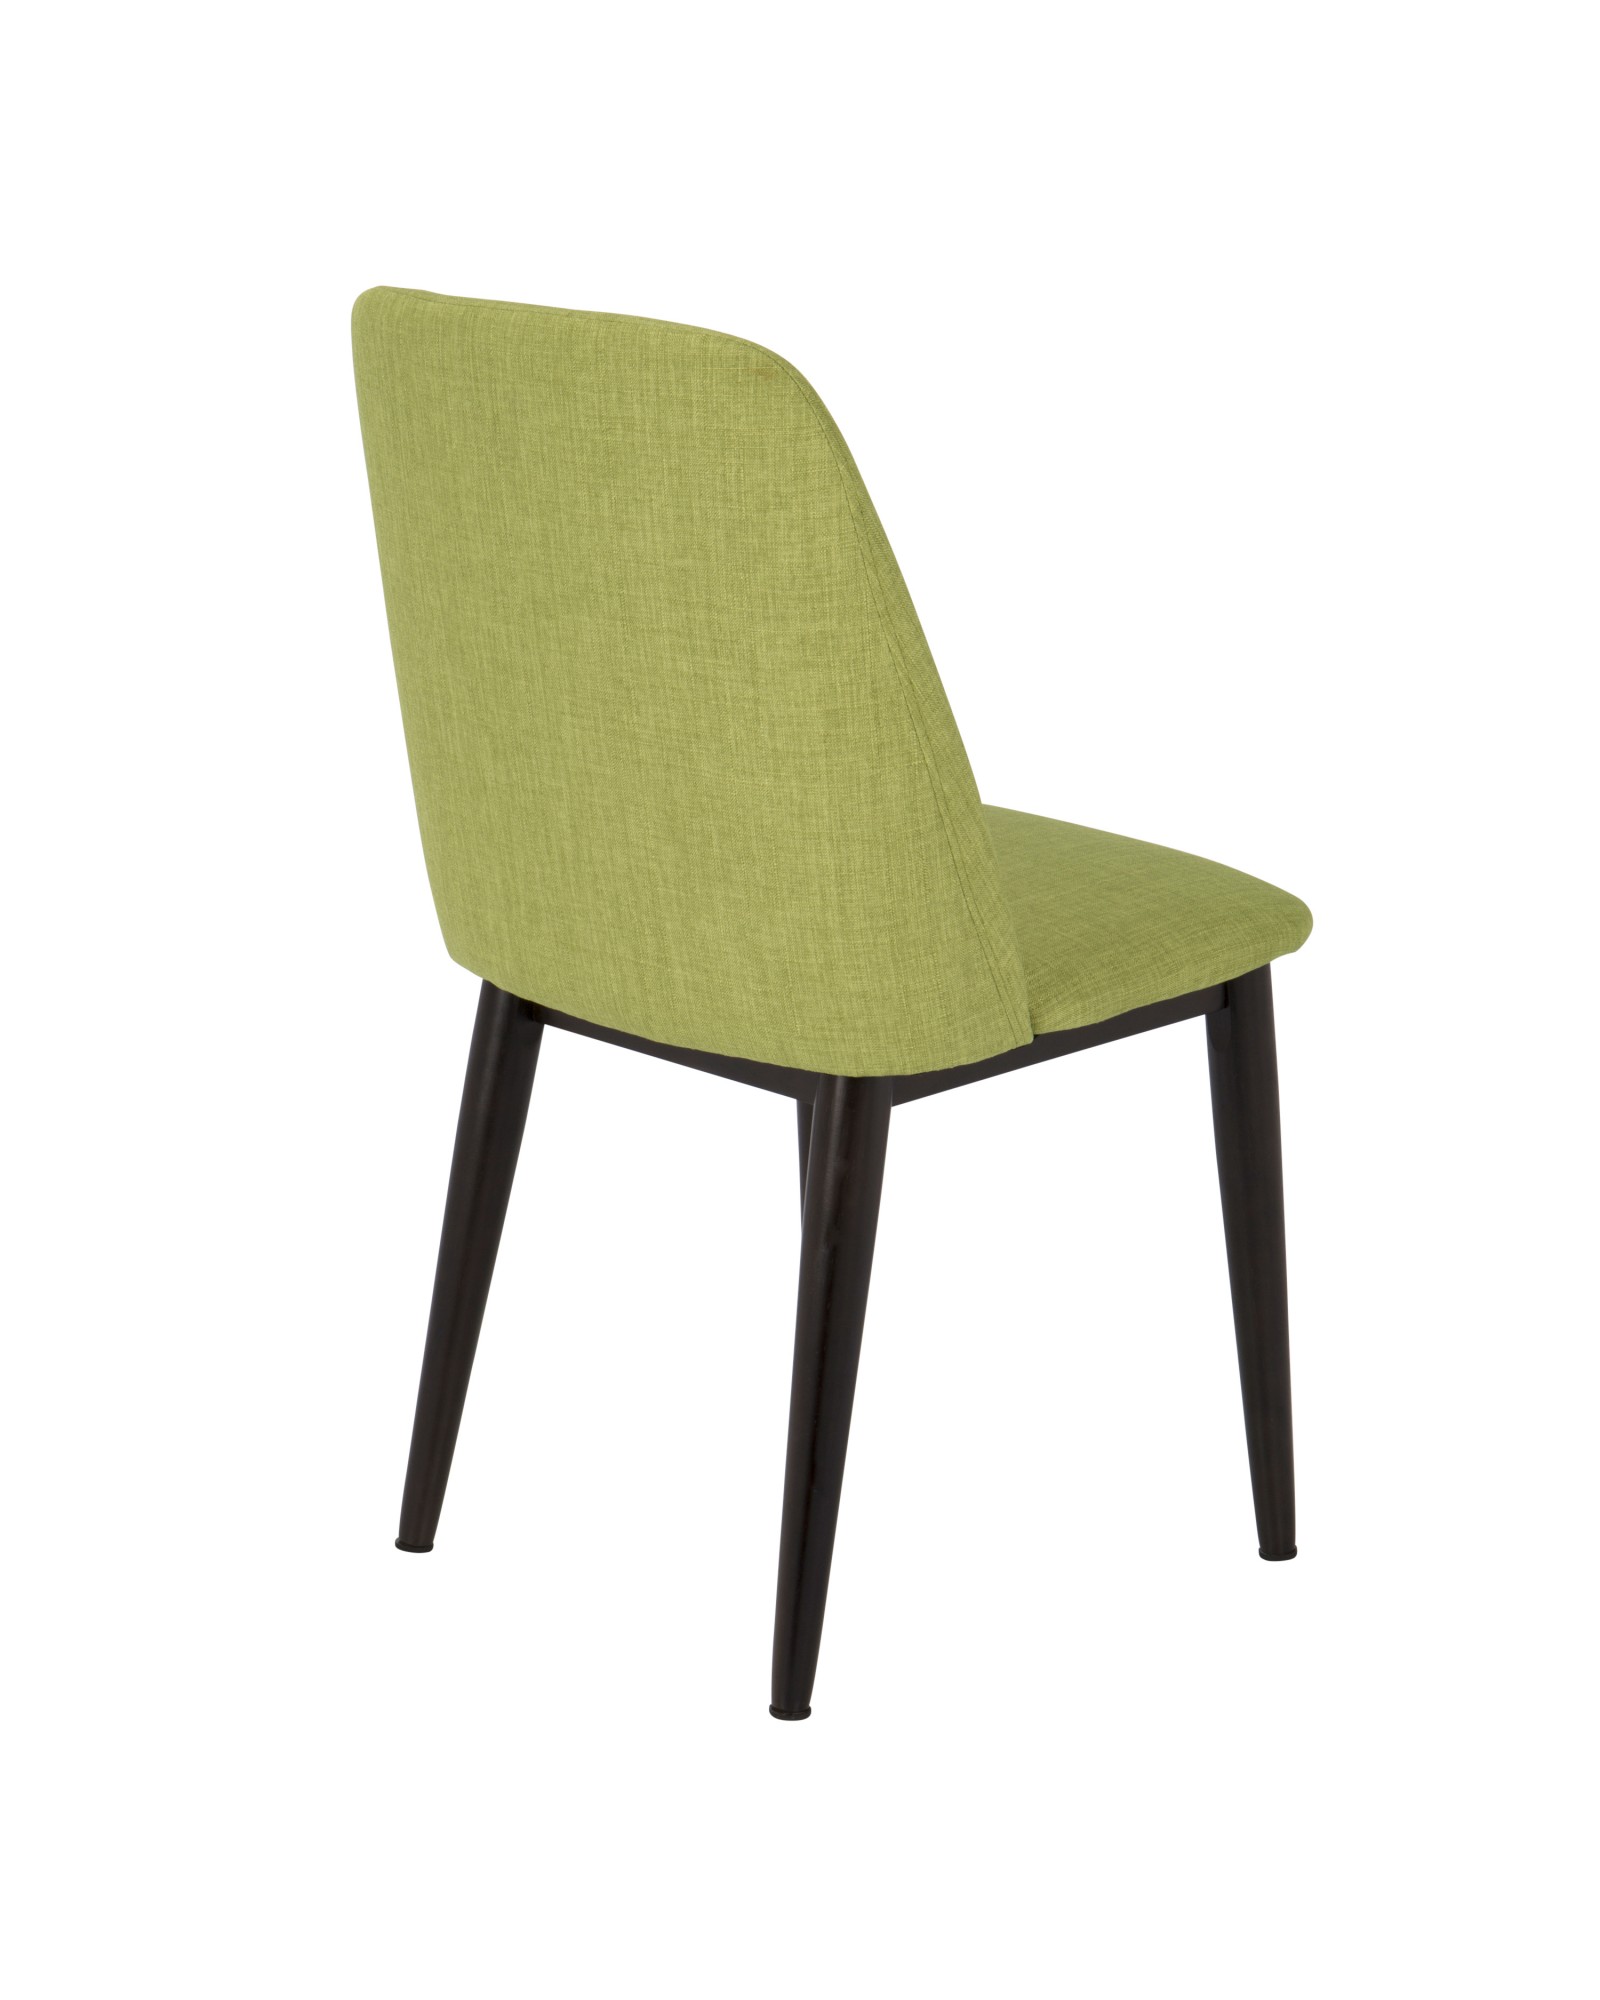 Tintori Contemporary Dining Chair in Green Fabric - Set of 2